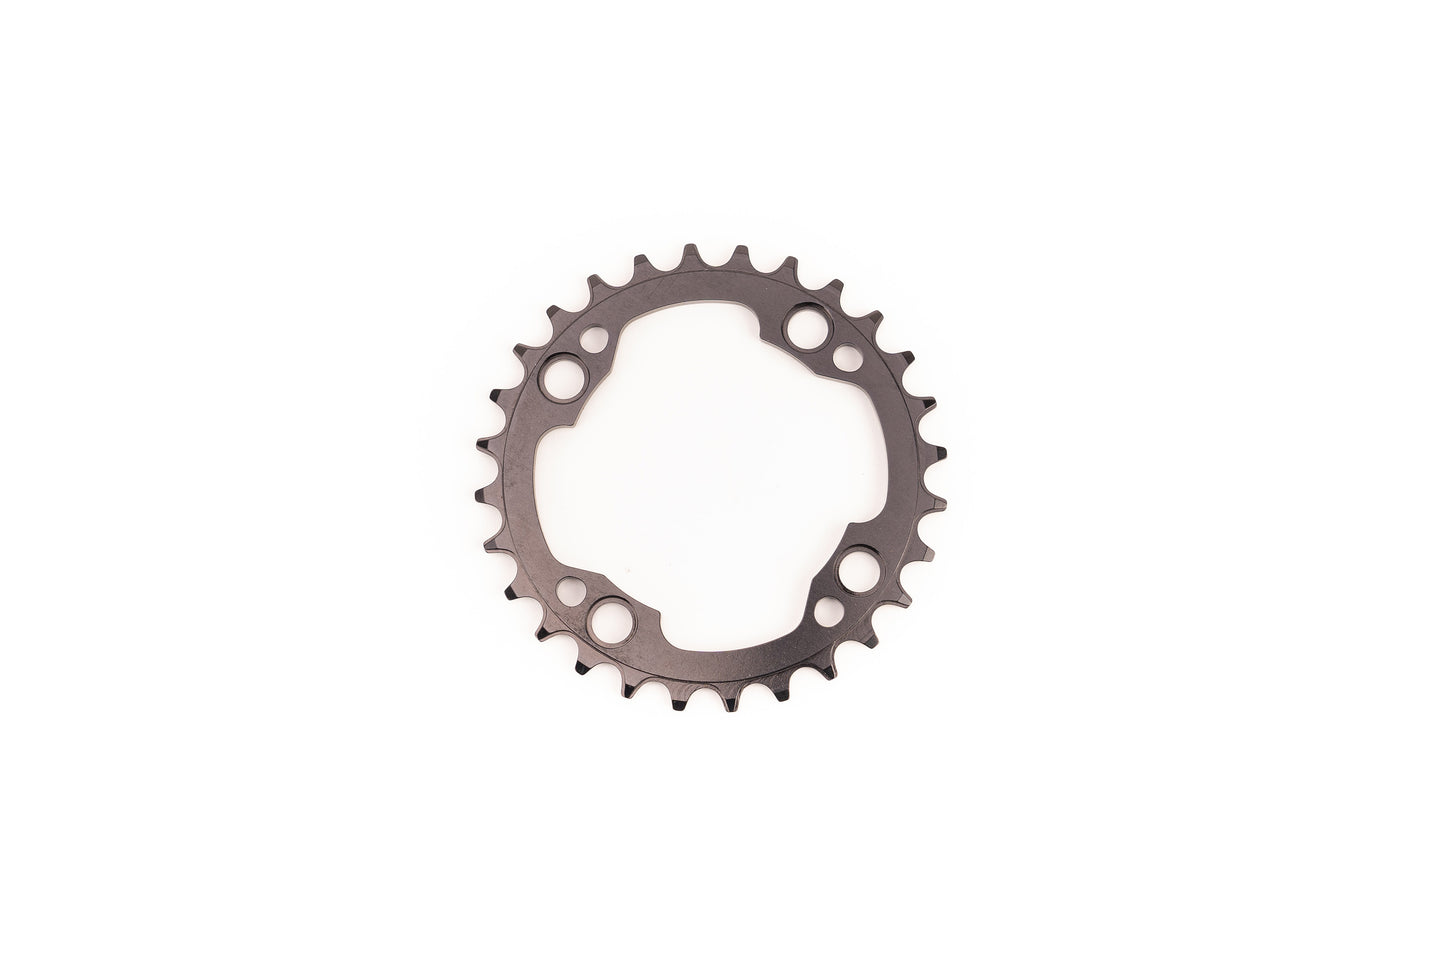 North Shore Billet Variable Tooth Chainring 28Tx88mm BCD